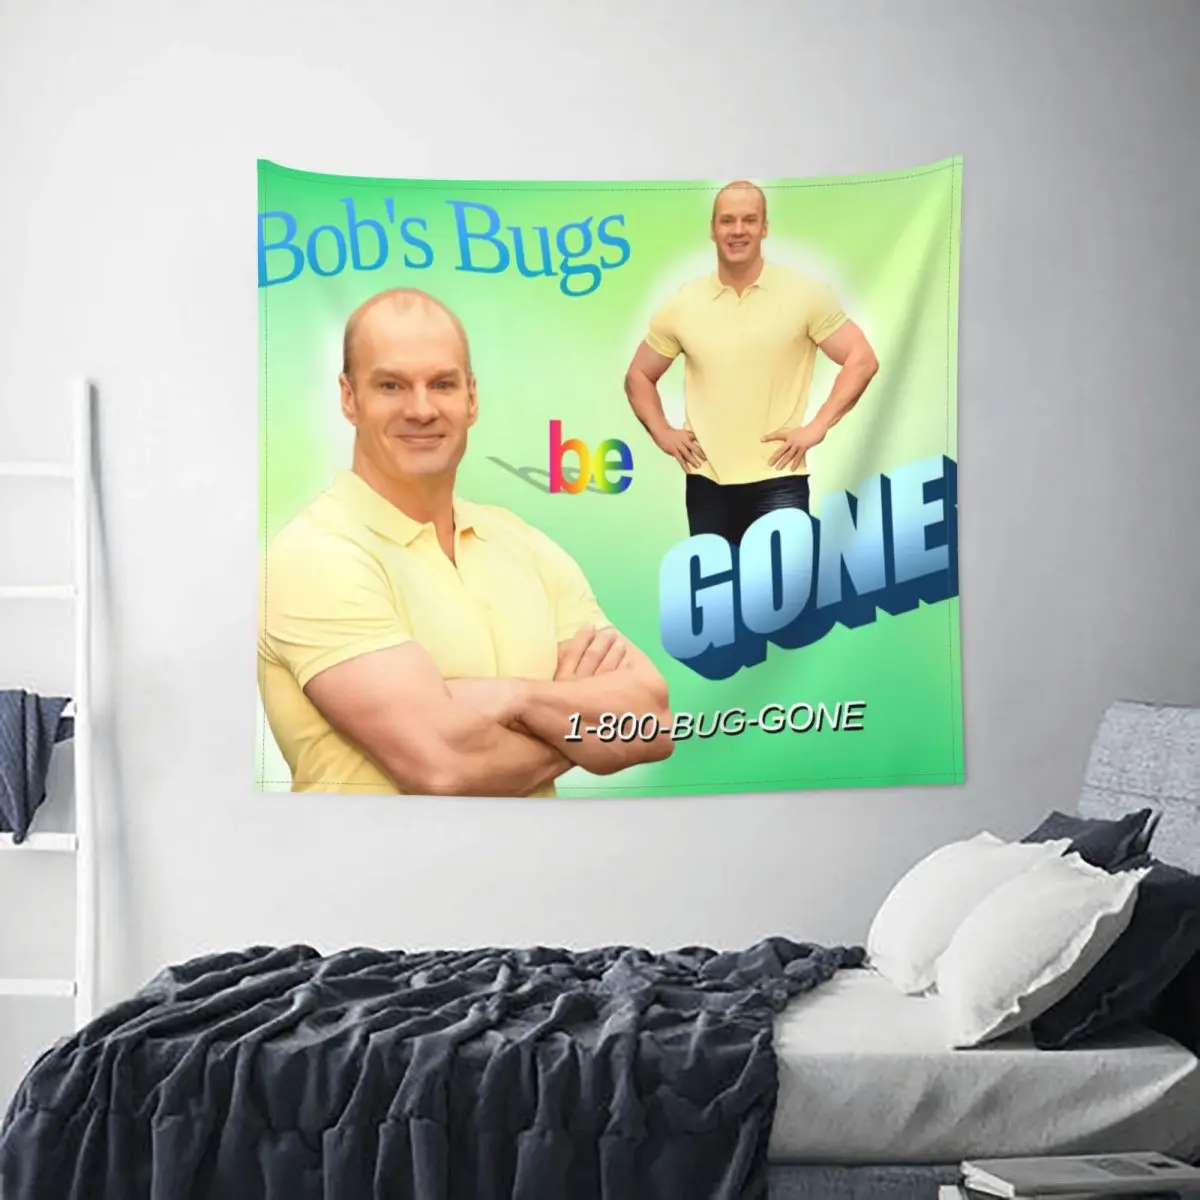 

Bob's Bugs Be Gone Tapestry Hippie Polyester Wall Hanging Wall Decor Background Cloth Witchcraft Wall Blanket